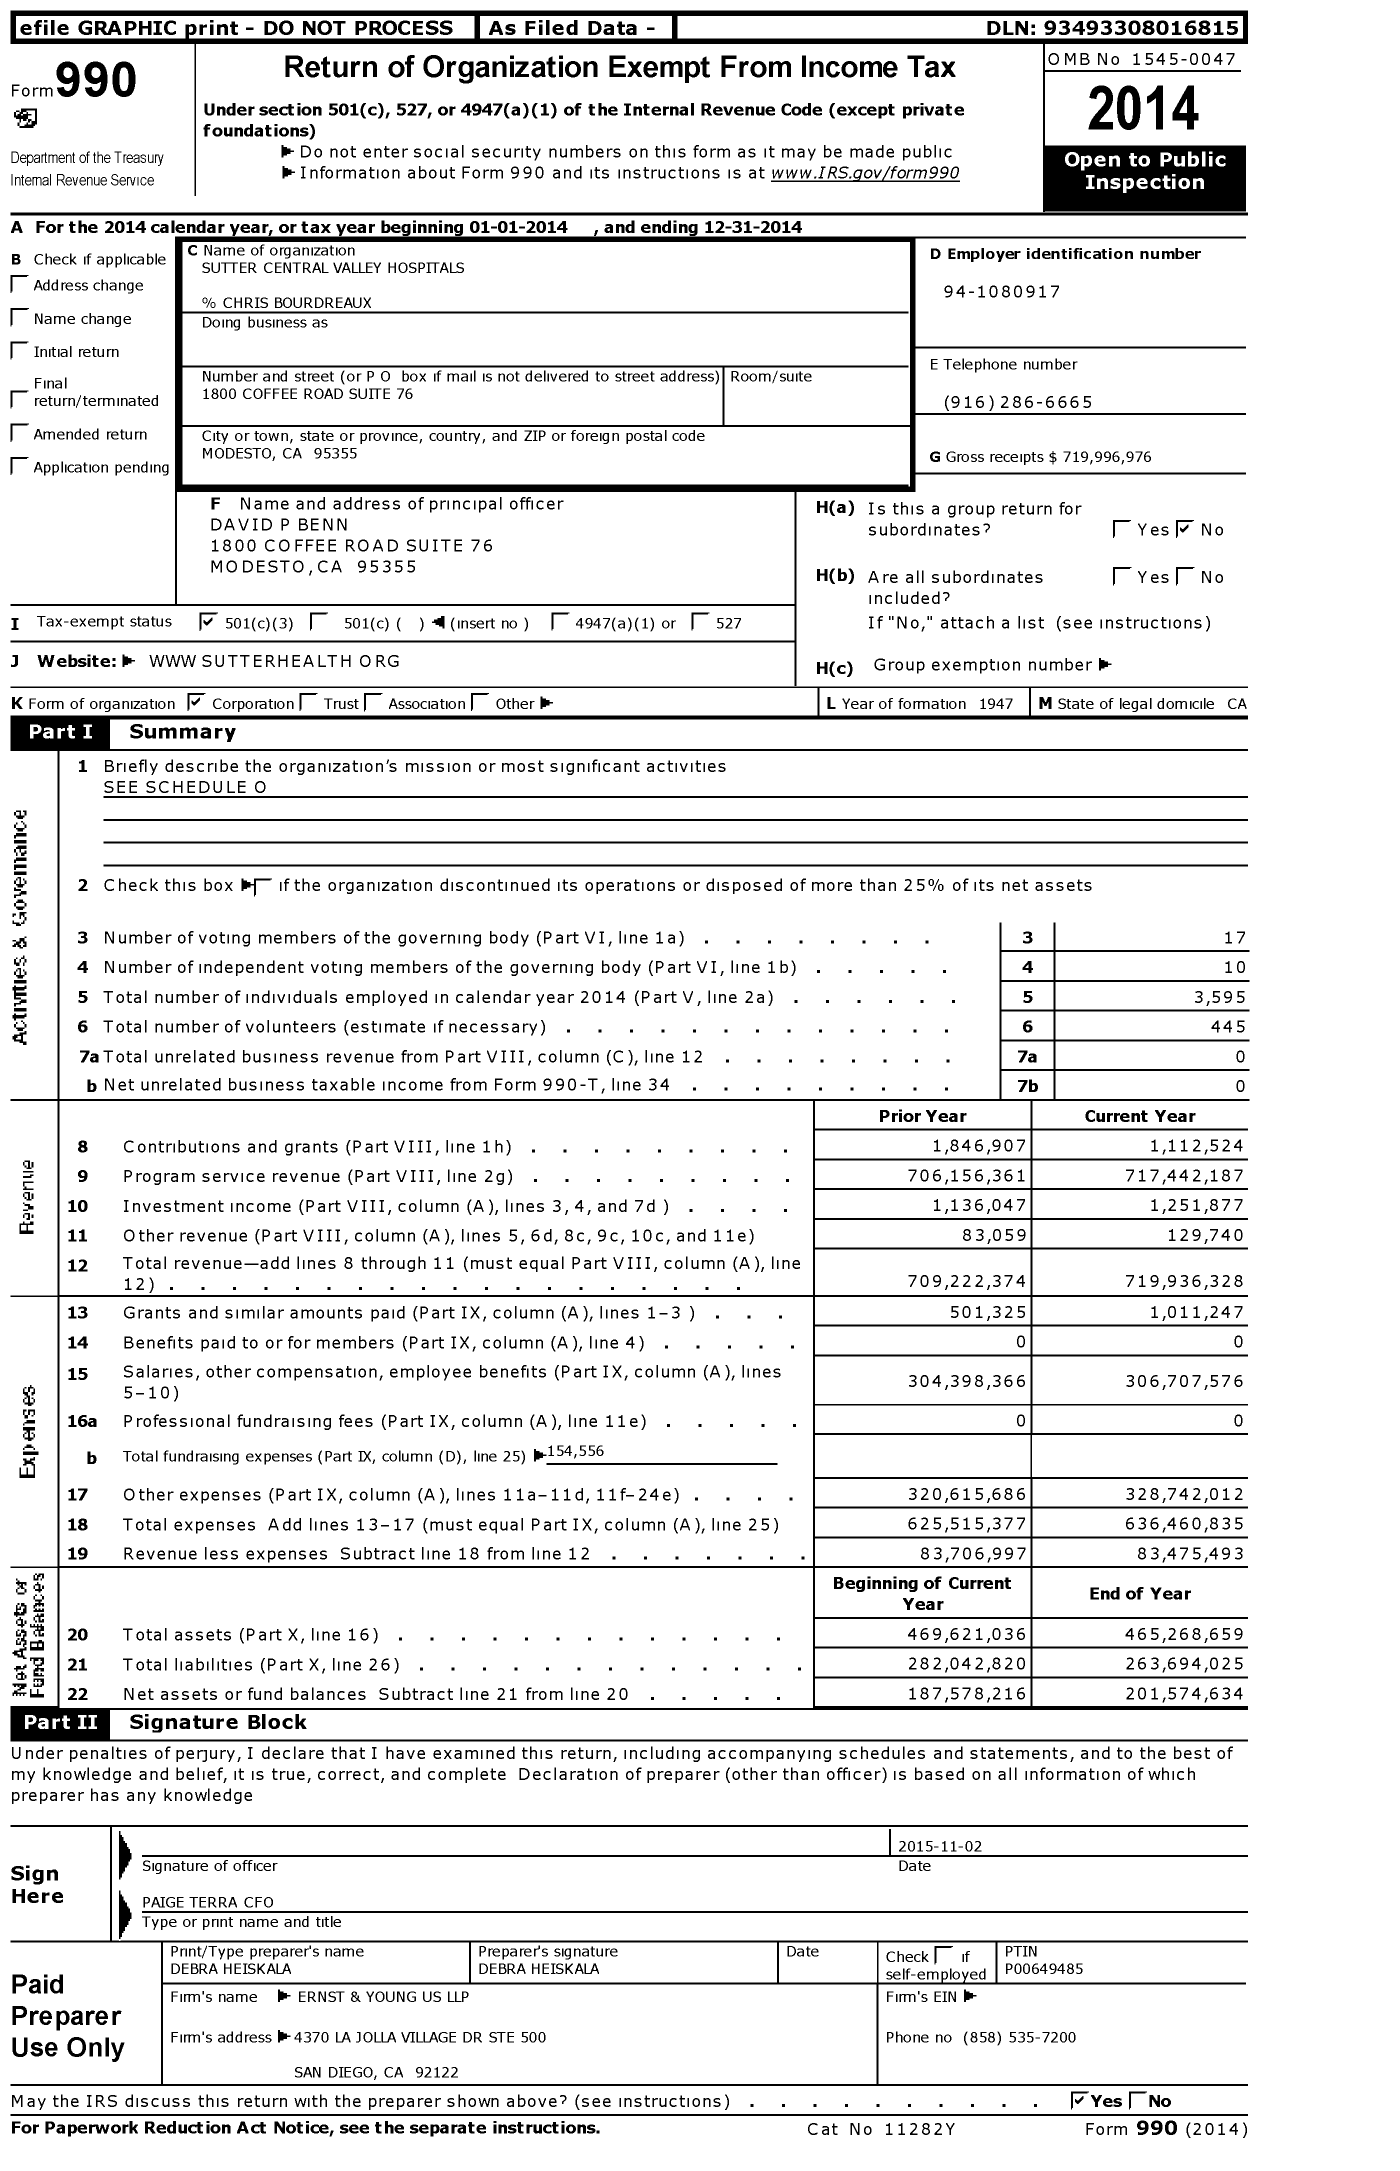 Image of first page of 2014 Form 990 for Memorial Medical Center (MMC)